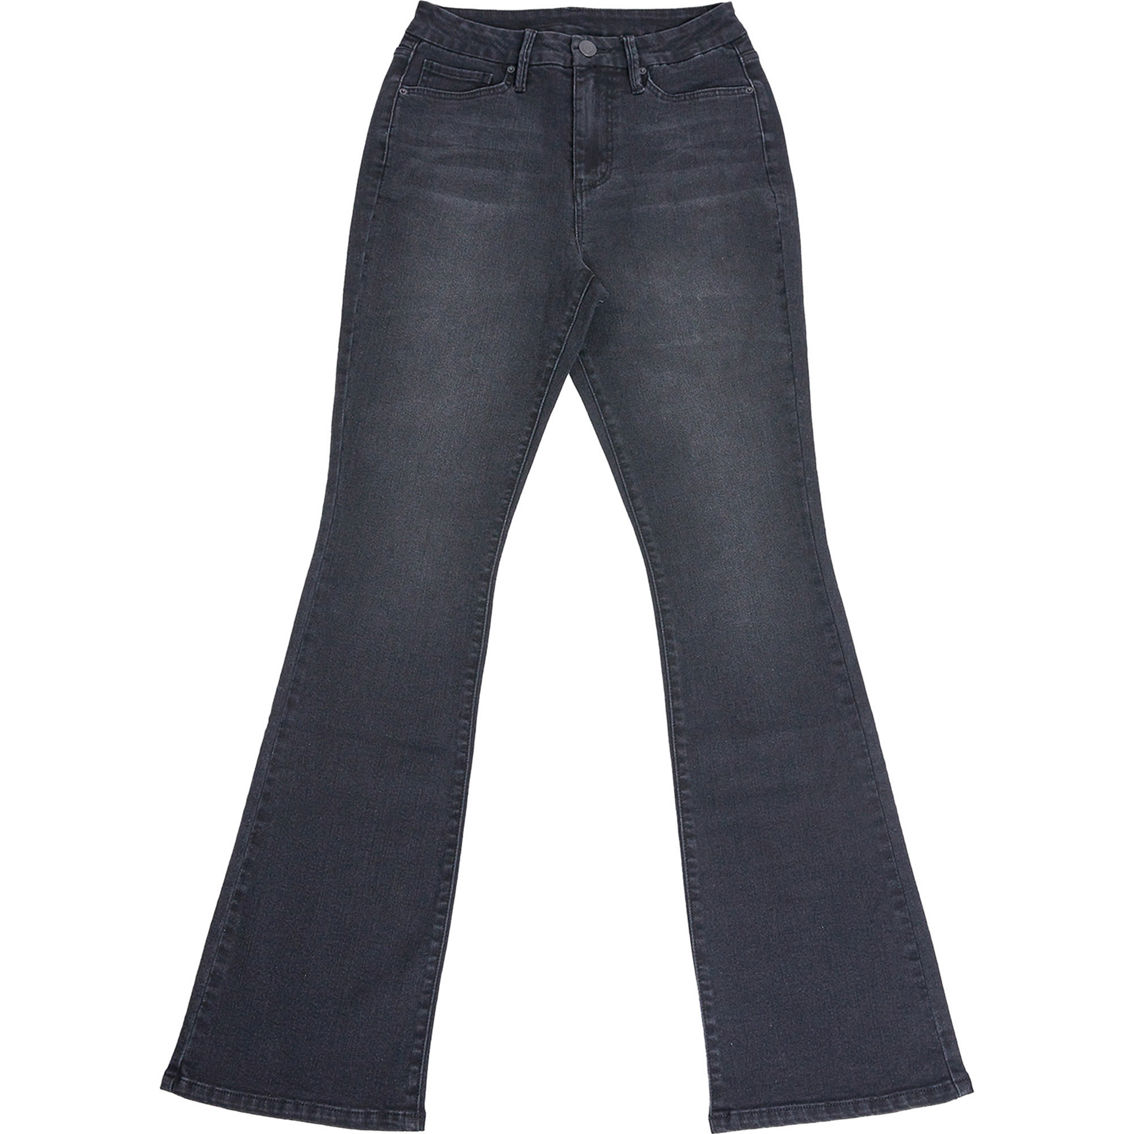 Ymi Jeans Juniors Curvy Bootcut Jeans | Jeans | Clothing & Accessories ...